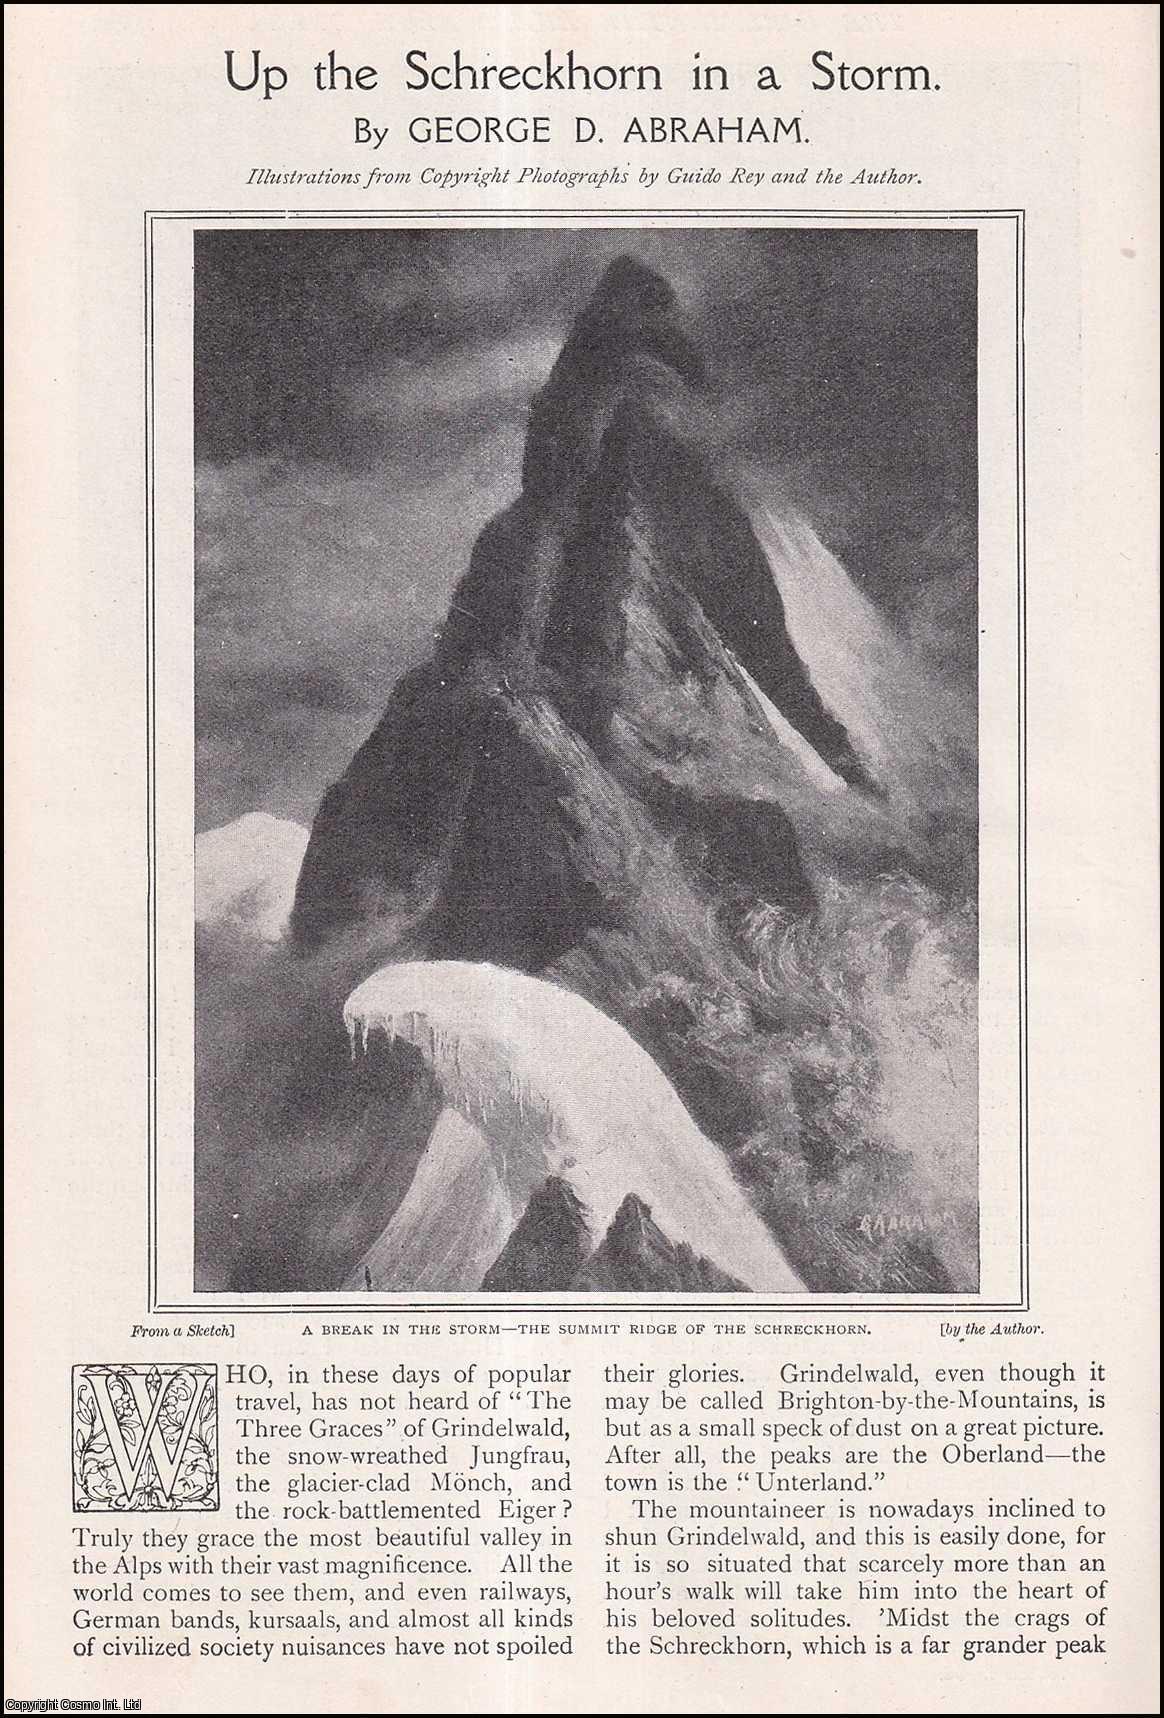 George D. Abraham - Up the Schreckhorn Mountain in a Storm, Switzerland. An uncommon original article from The Strand Magazine, 1908.